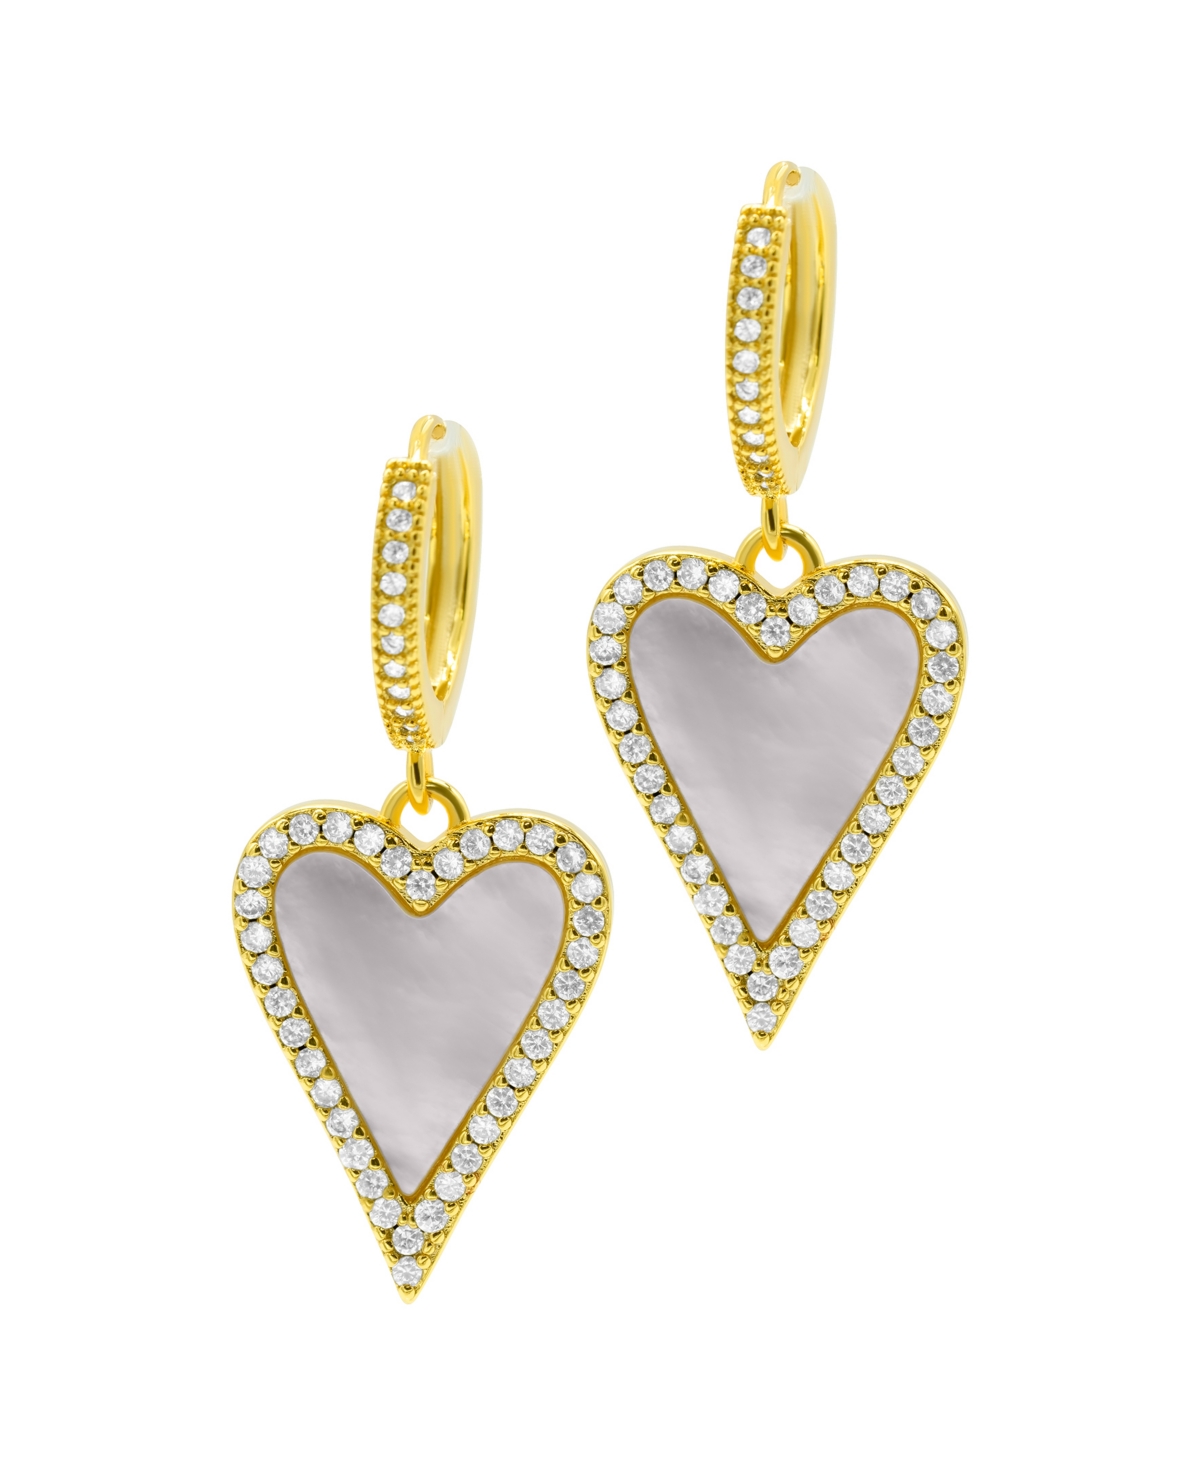 14K Gold-Plated White Mother-of-Pearl Crystal Halo Heart Drop Huggie Earrings - White